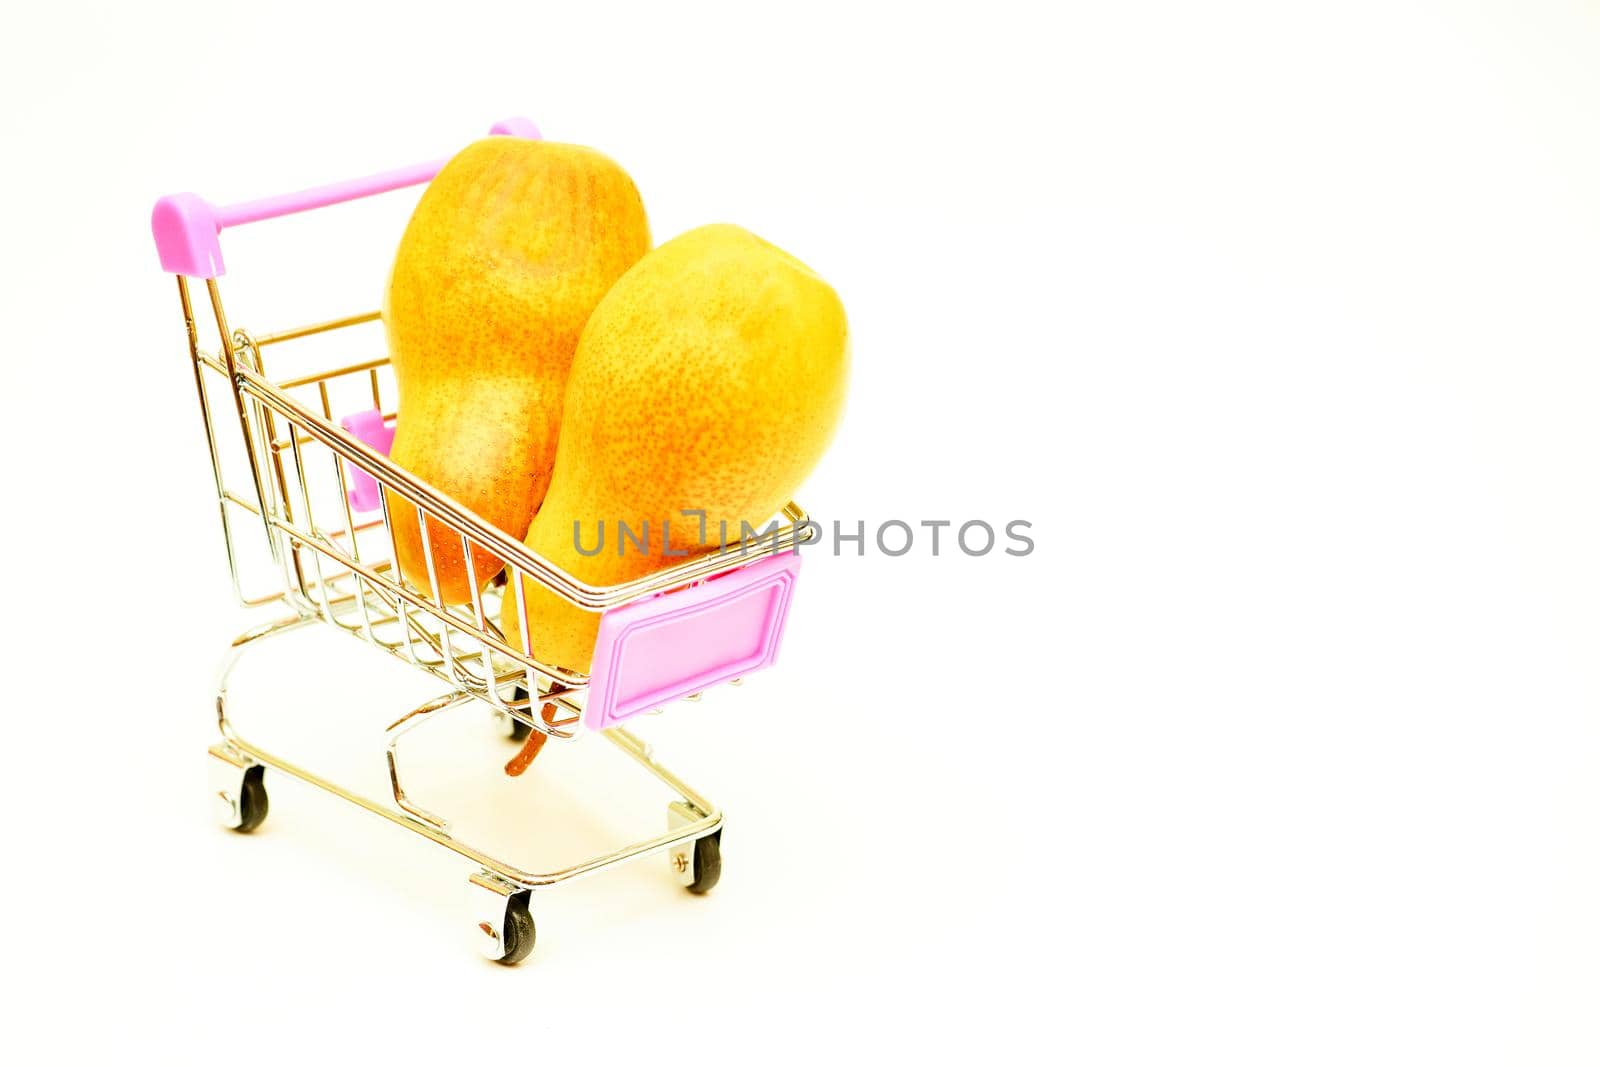 Metal shopping trolley in a supermarket store with two white ripe savory pears by jovani68